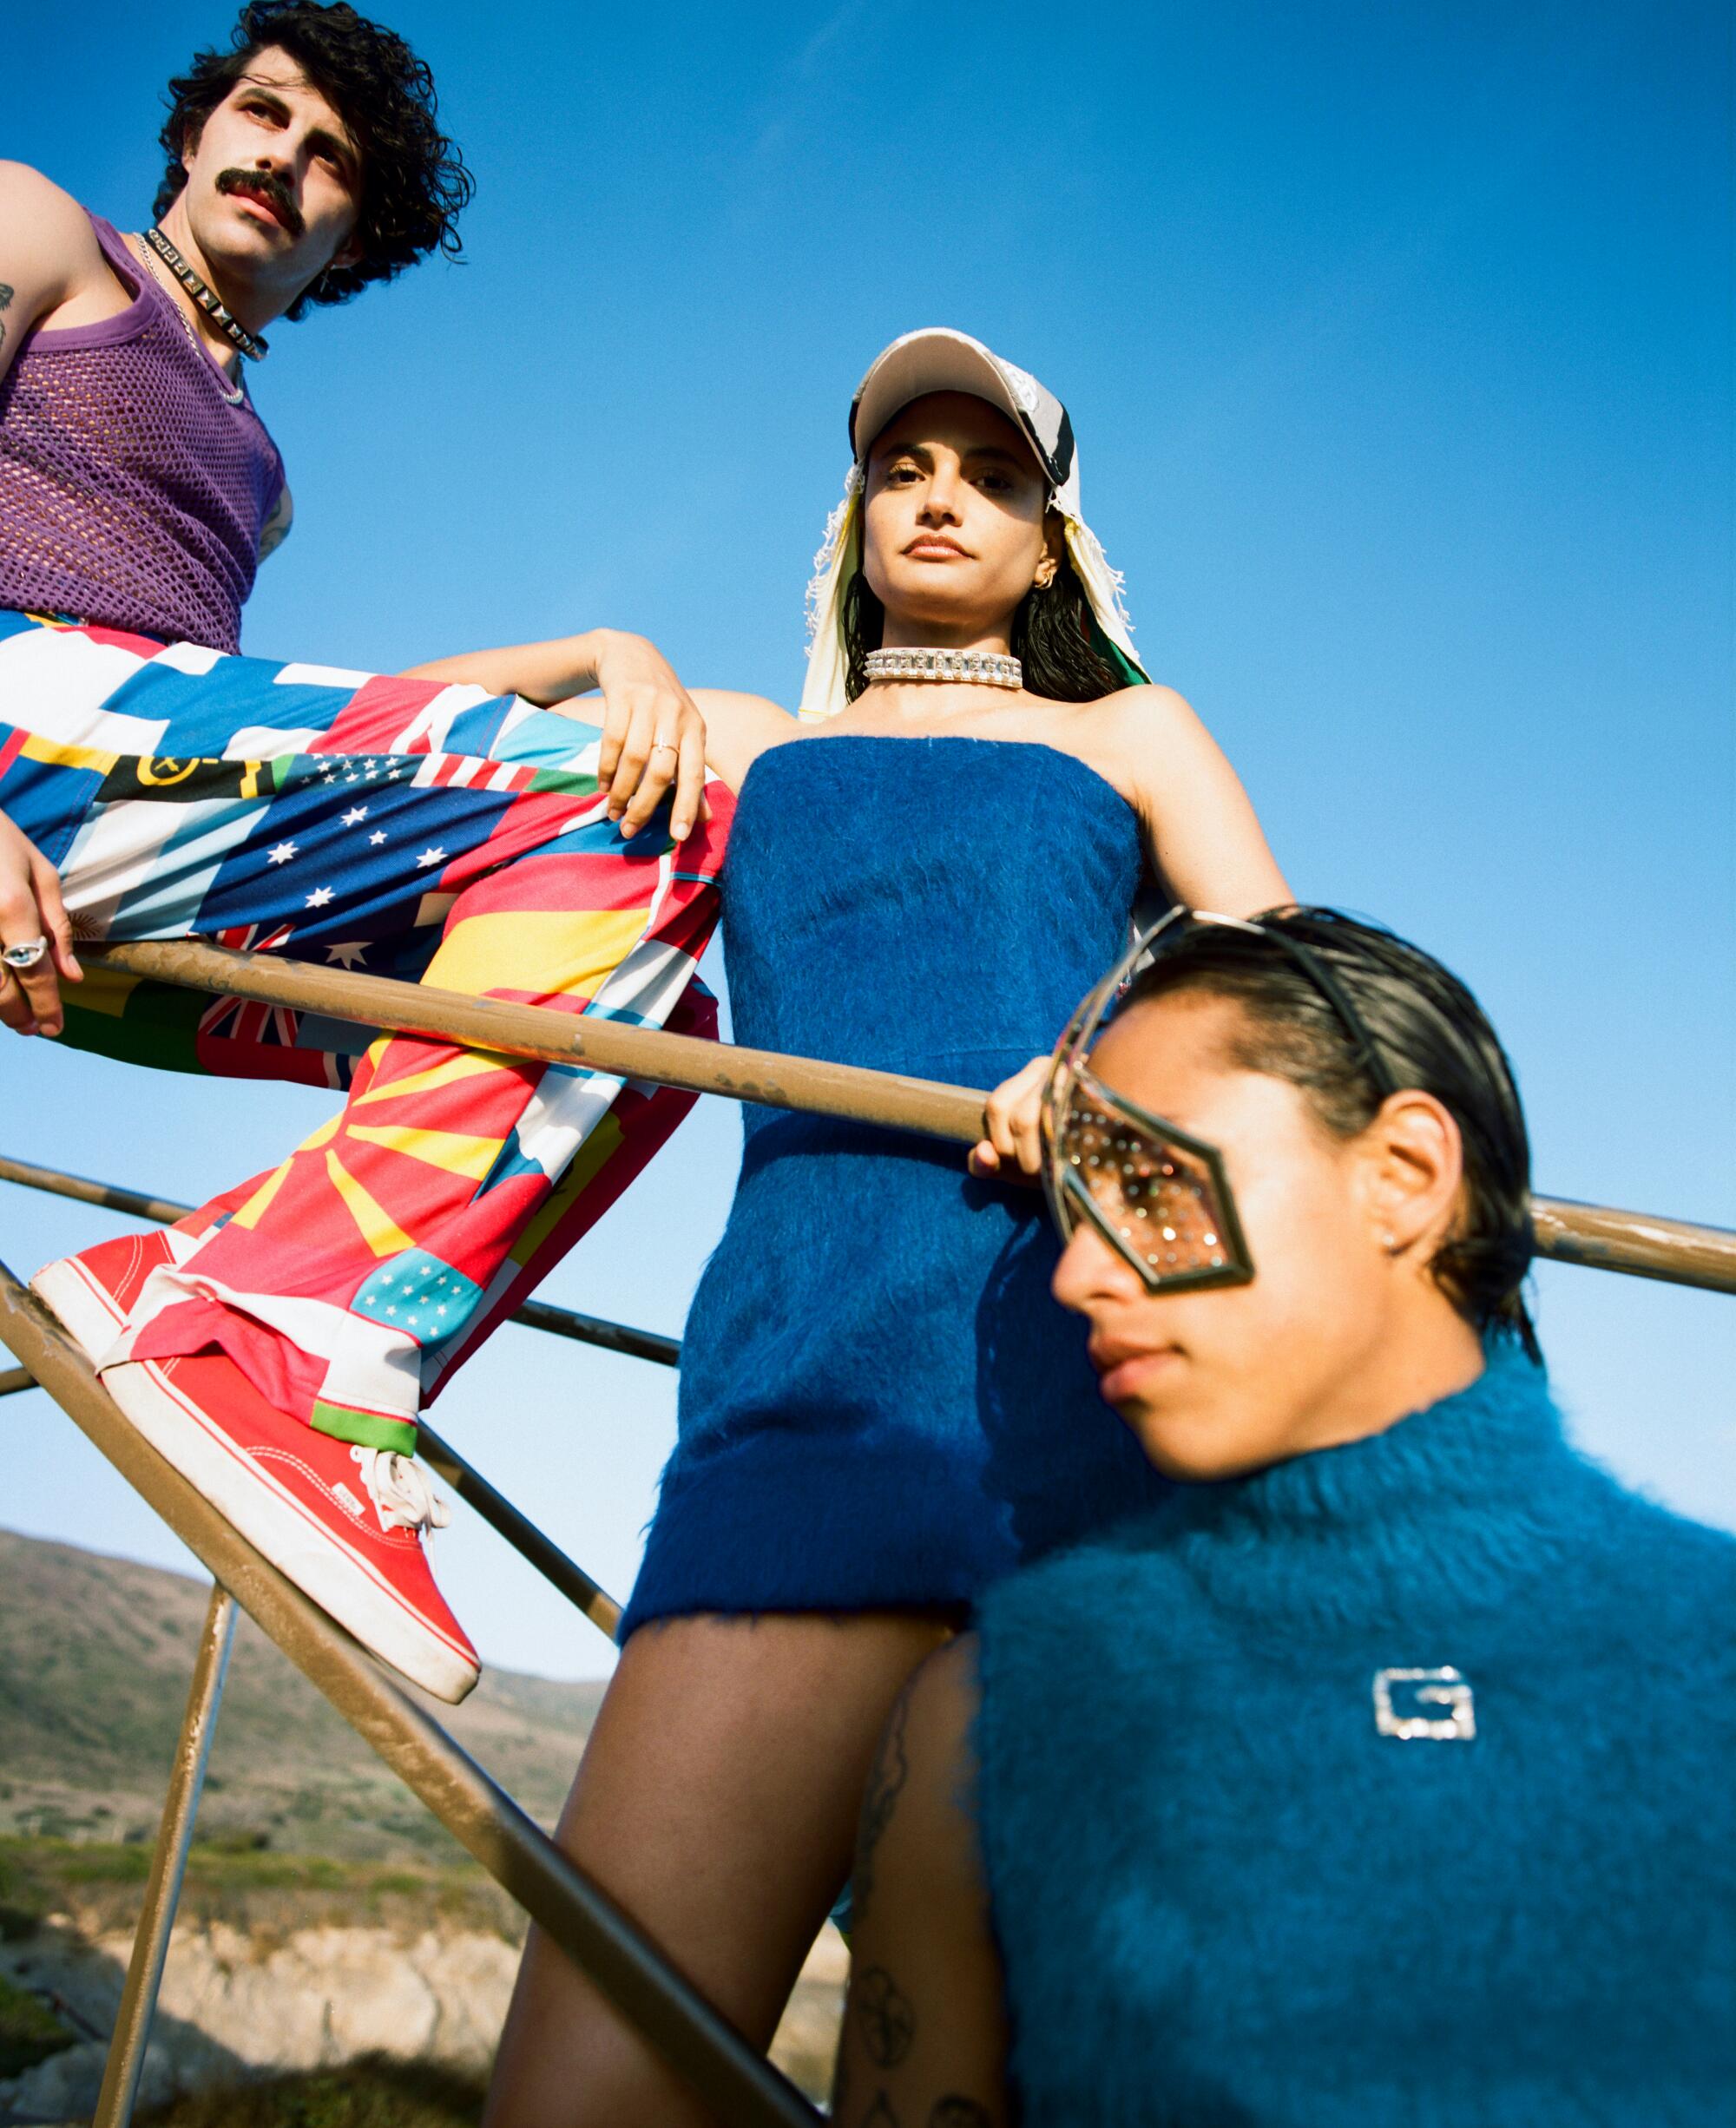 Three people wearing colorful outfits hang out by a railing on the beach.